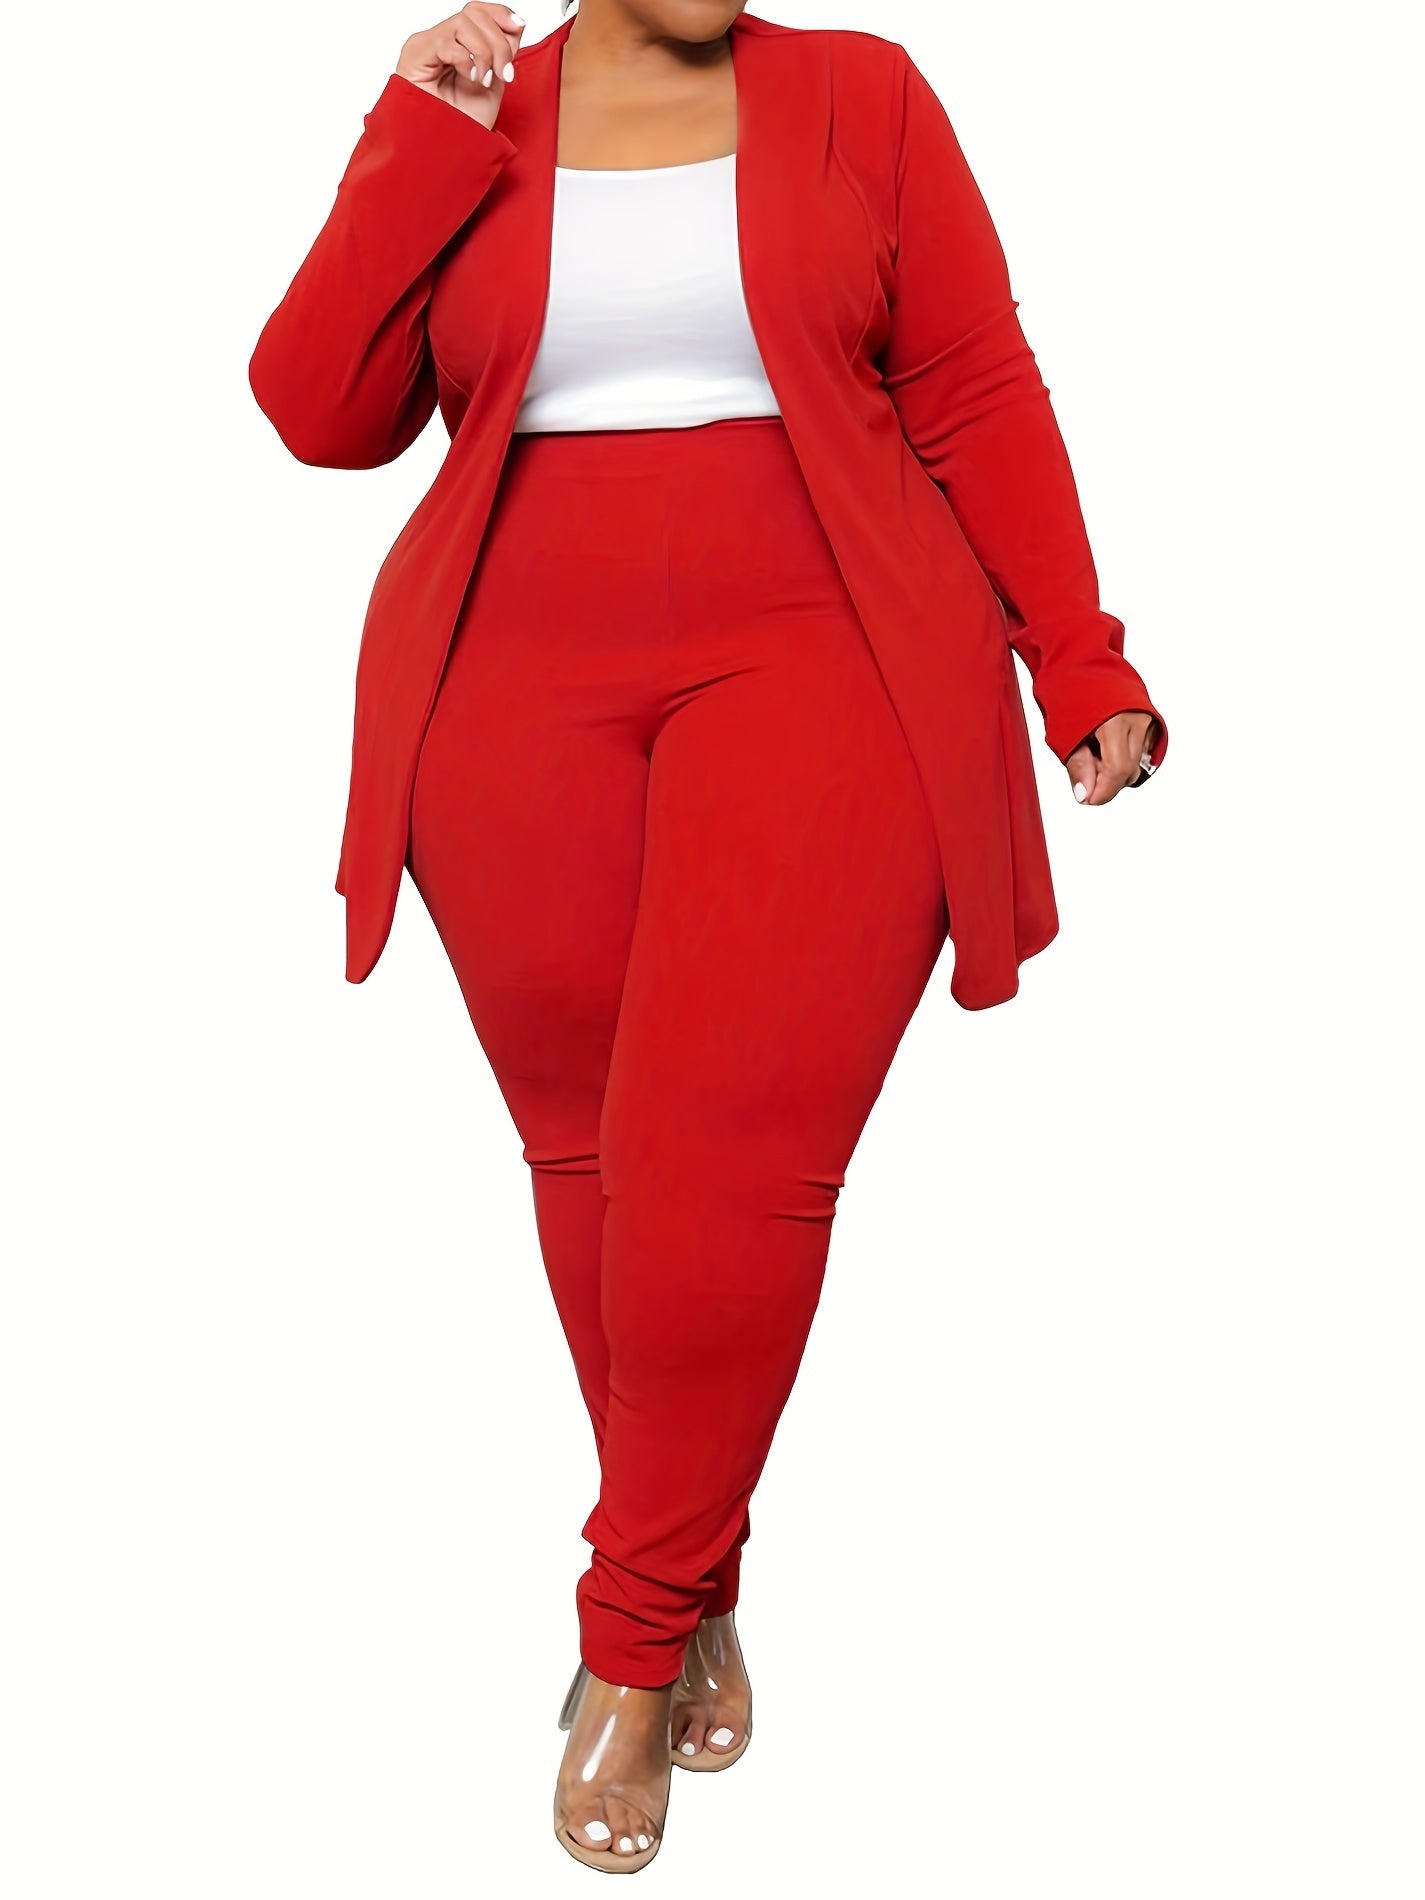 Plus Size Casual Outfits Set, Women's Plus Solid Long Sleeve Open Front Top & Leggings Outfits Two Piece Set